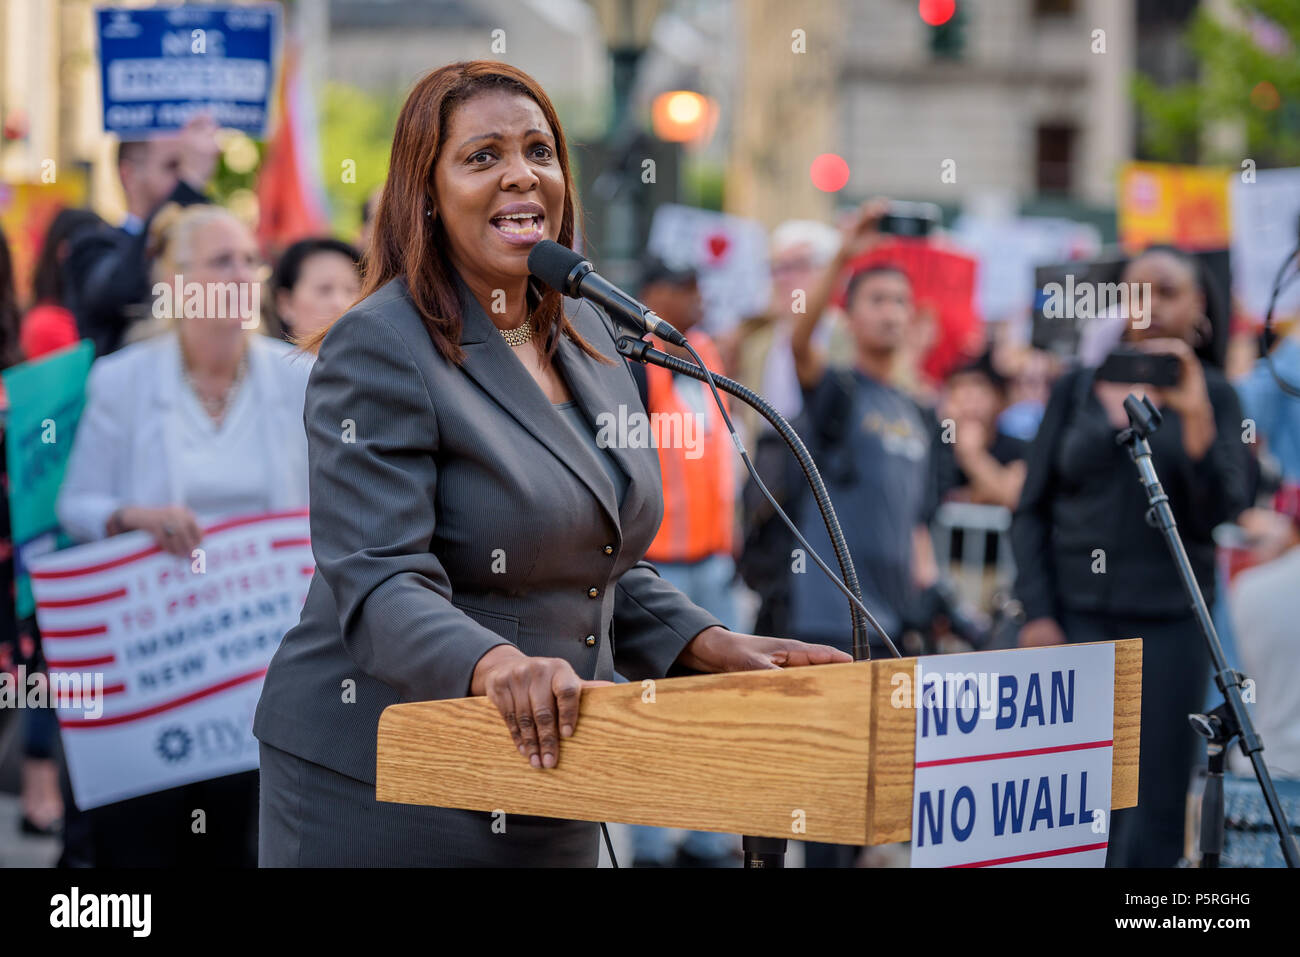 New York, United States. 26th June, 2018. New York City Public Advocate Letitia James - Over a thousand New Yorkers and immigration rights community organizations gathered at Foley Square in lower Manhattan on June 26, 2018, to rally against the Supreme Court decision announced this morning to uphold the Muslim Ban. The Asian American Federation is calling on its member agencies, advocates and community leaders, allies, and elected officials to stand together in solidarity. Credit: Erik McGregor/Pacific Press/Alamy Live News Stock Photo